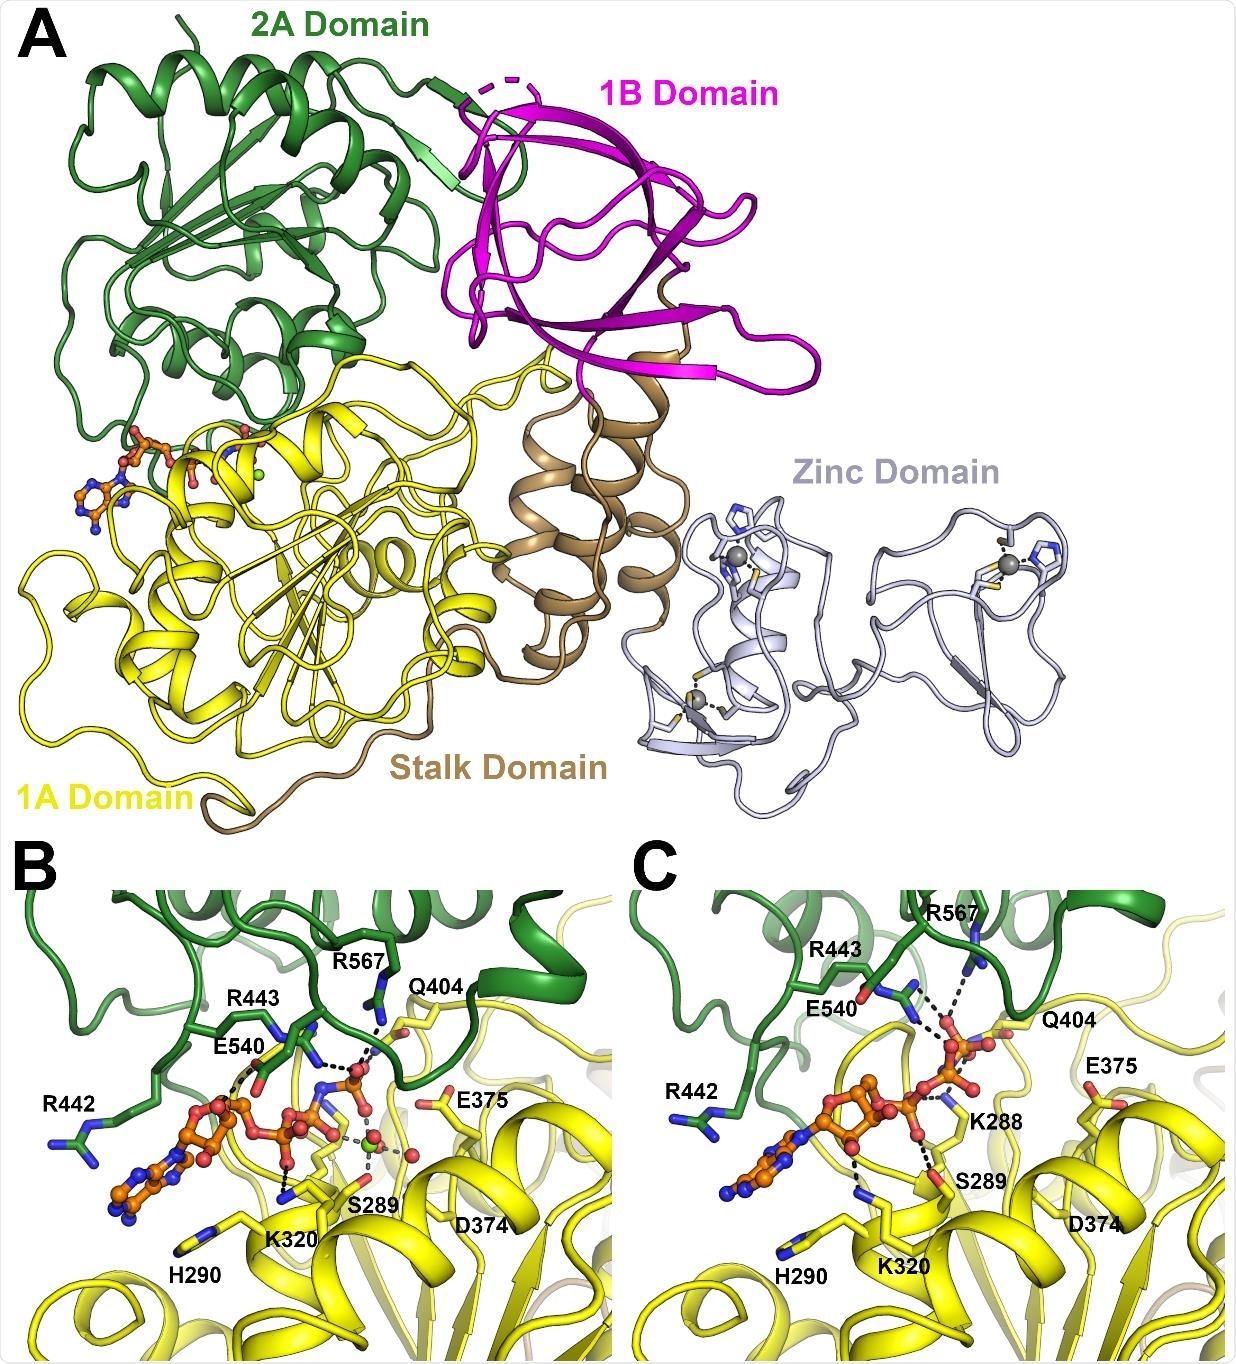 Overall structure of SARS-CoV-2 NSP13. (A) Structure overview with domains labelled and colored individually (the same color scheme is used throughout). The AMP-PNP nucleotide is shown in stick format in the nucleotide binding site between the 1A and 2A domains. (B) Close up view of the nucleotide binding mode for the AMP-PNP Mg2+ complex (mode A), with interacting residues labeled and shown in the stick format. (C) Close up view of the nucleotide binding form the AMP-PNP complex (mode B), viewed from the same orientation as panel B.